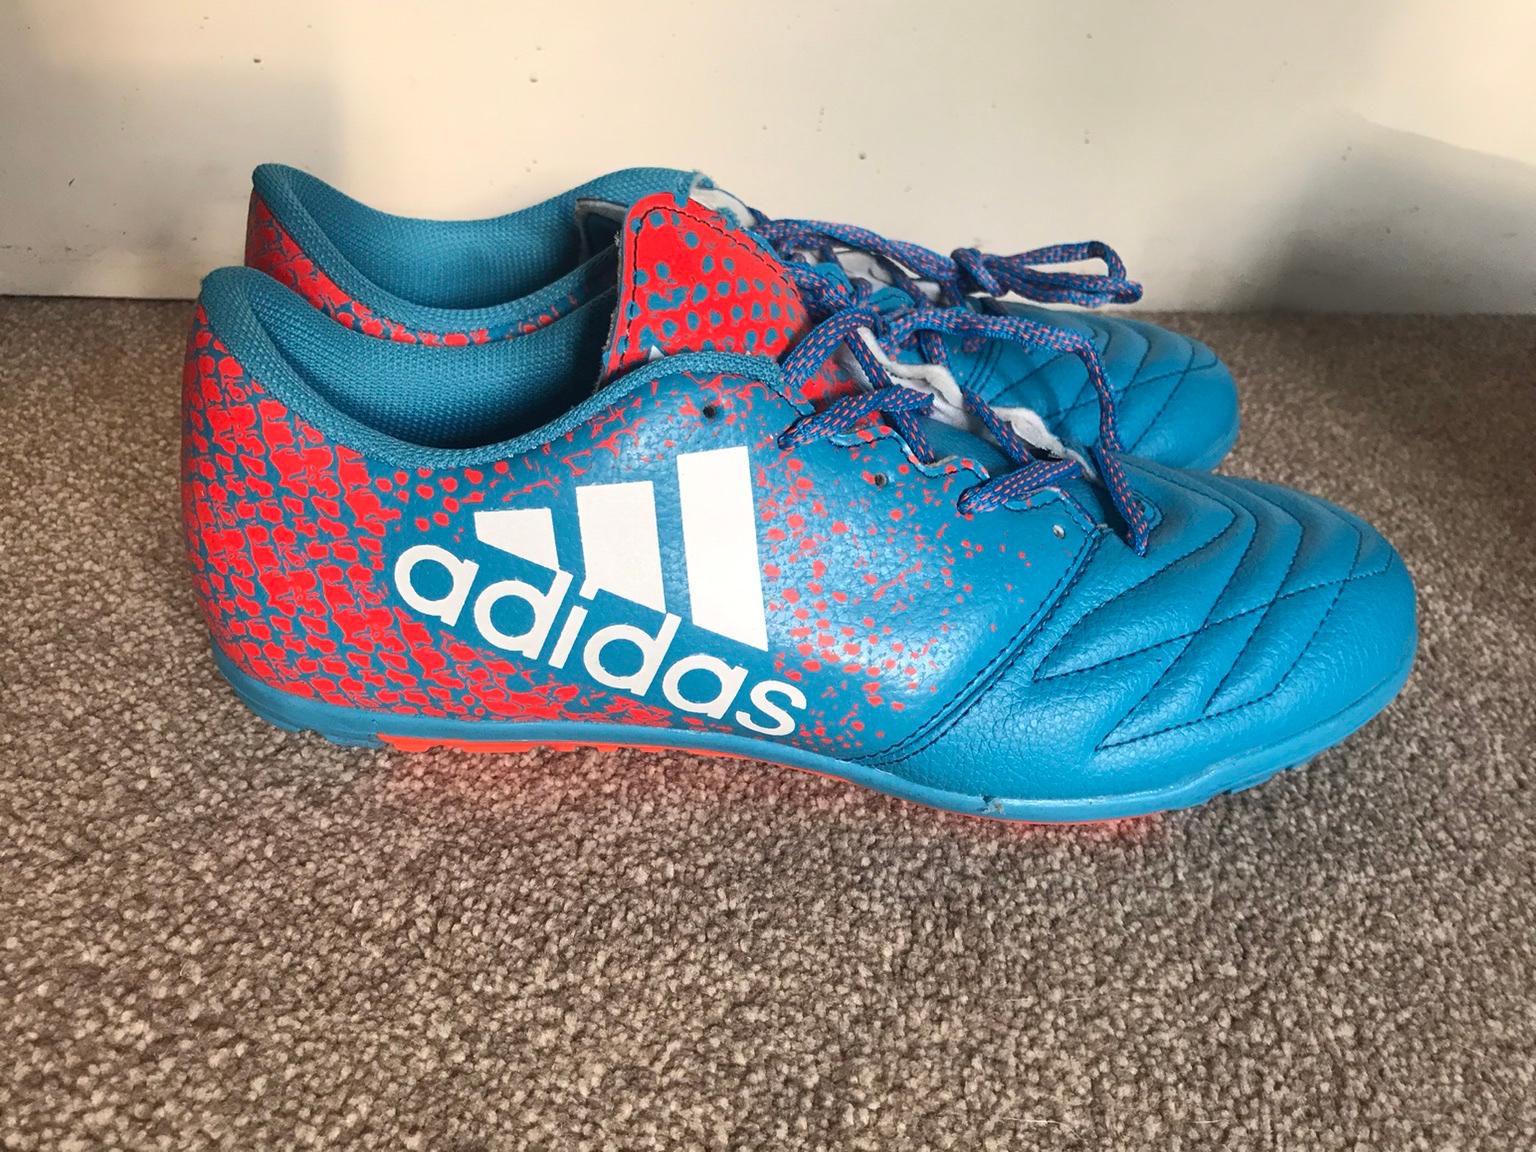 Mens Adidas Astro turf trainers size 8 in King&#39;s Lynn and West Norfolk for £12.00 for sale | Shpock